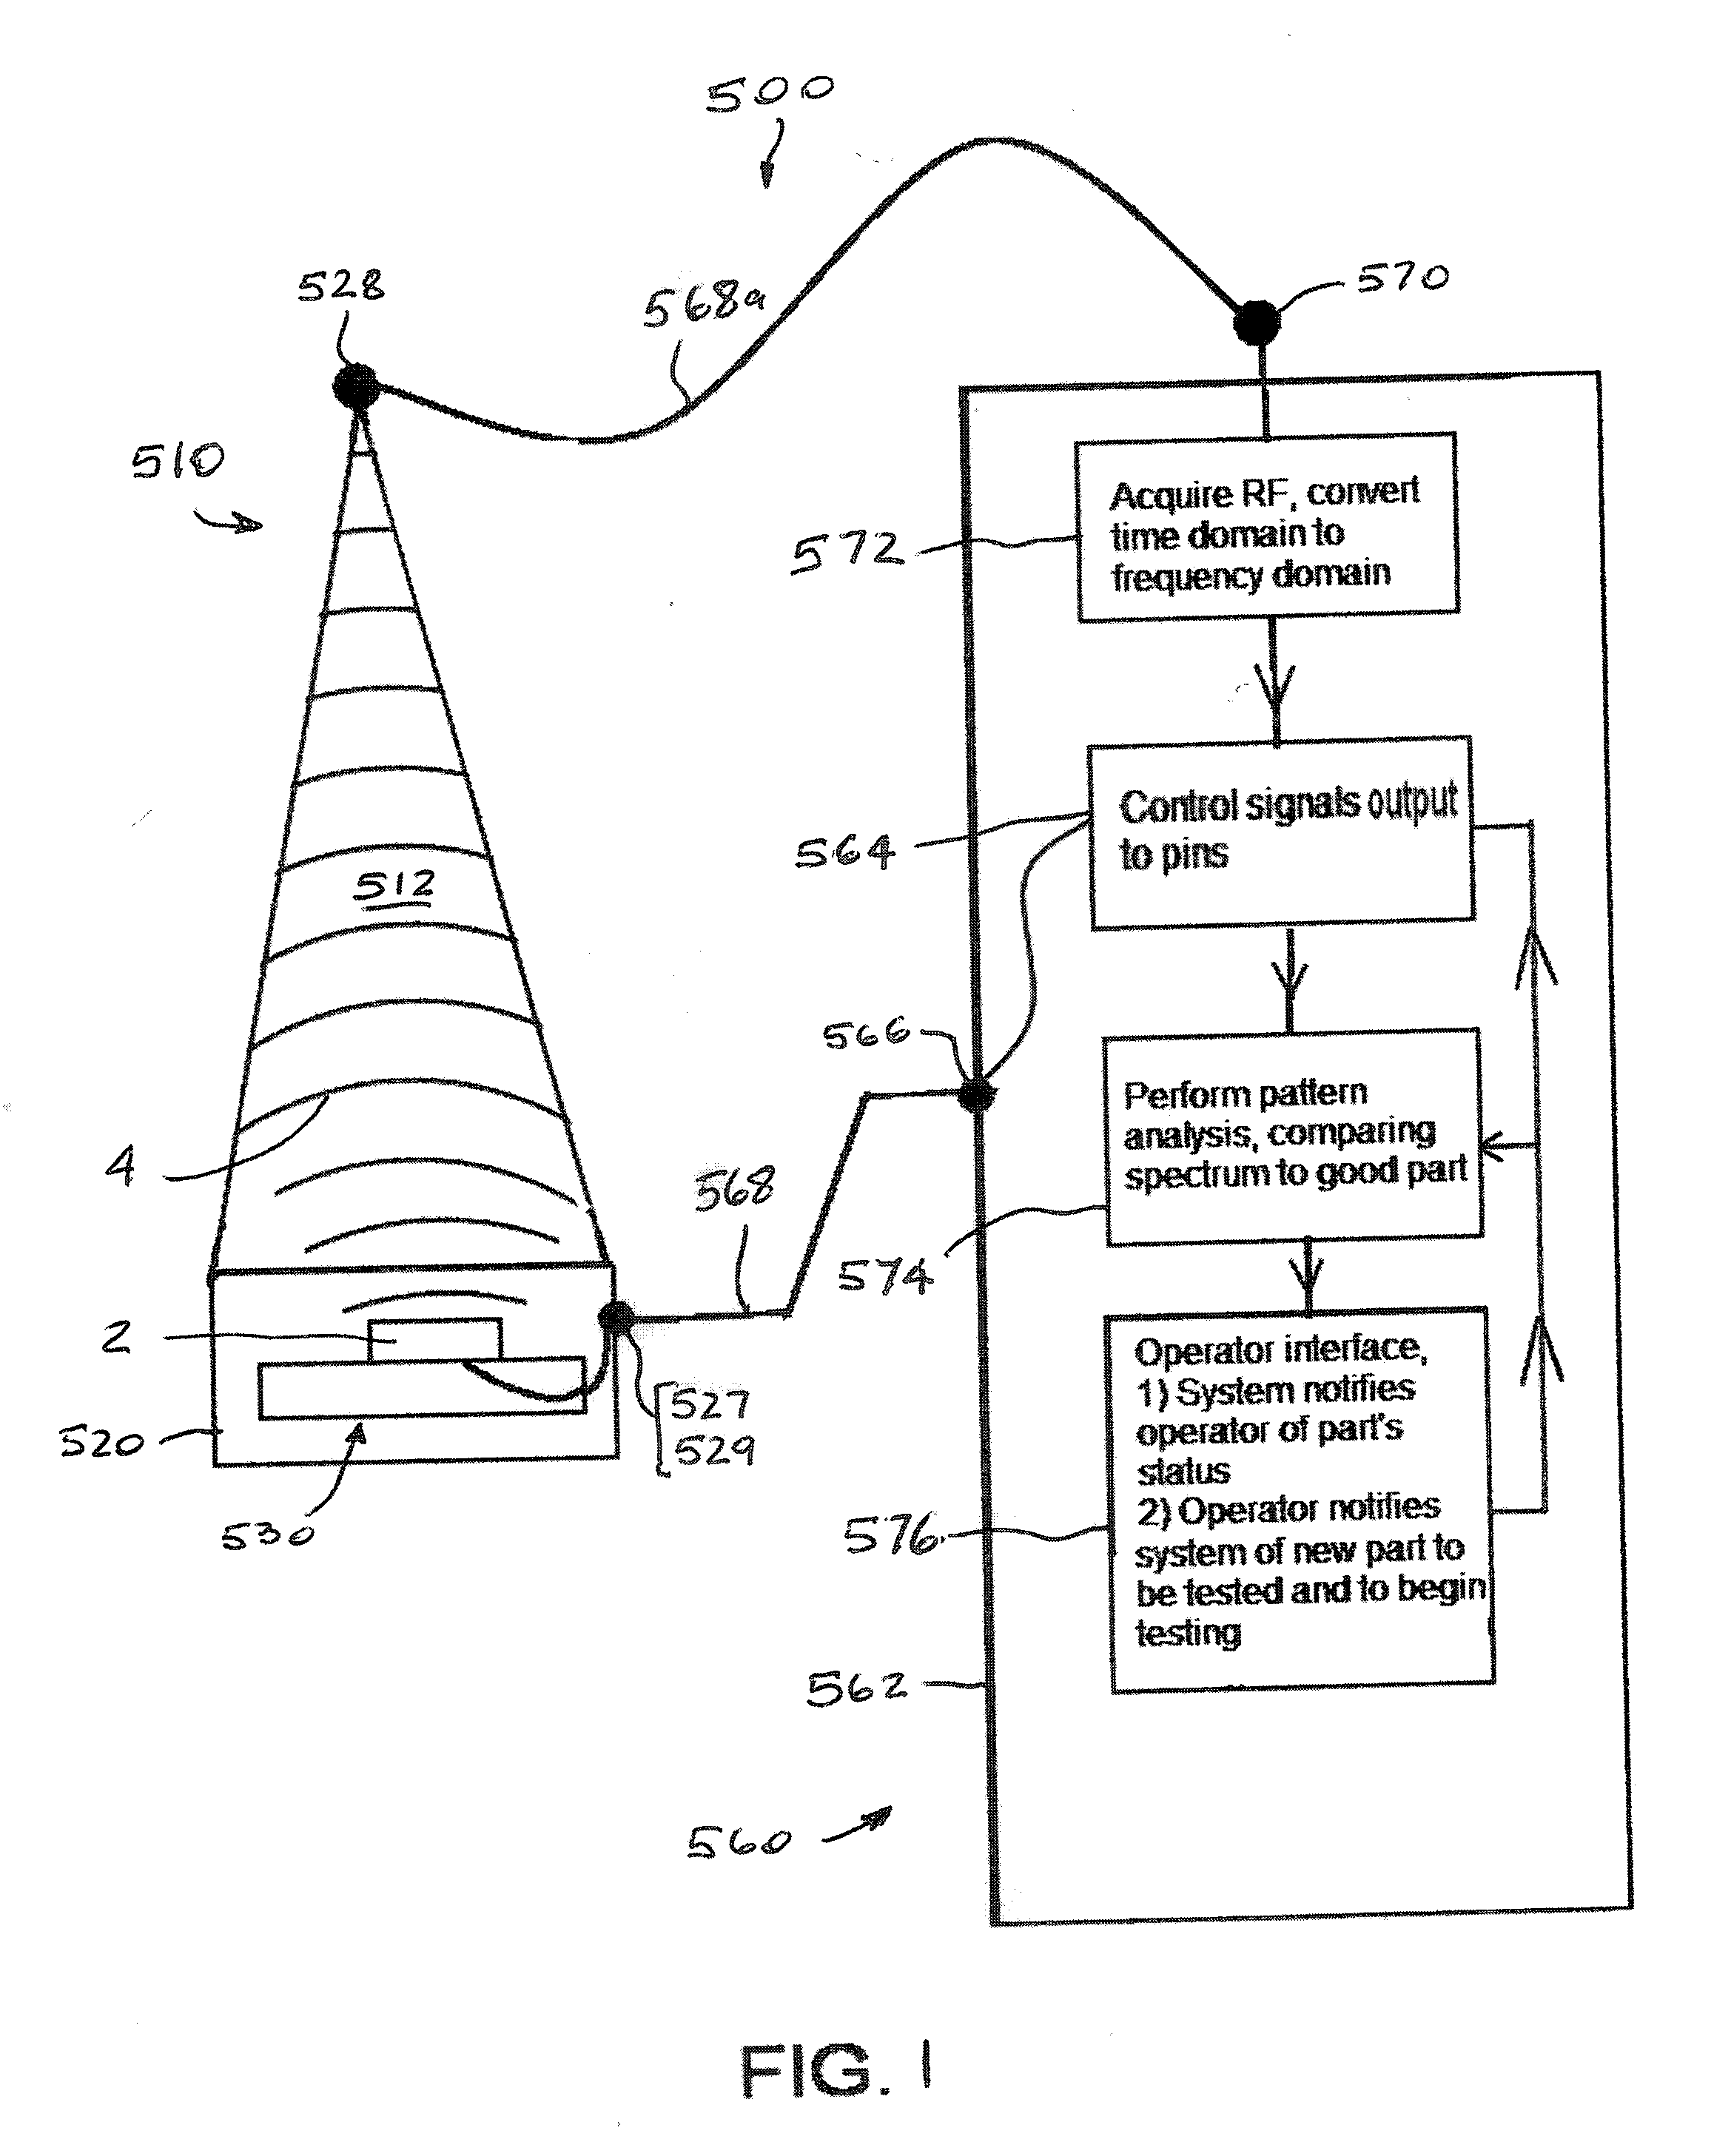 Method and Apparatus for Detection and Identification of Counterfeit and Substandard Electronics